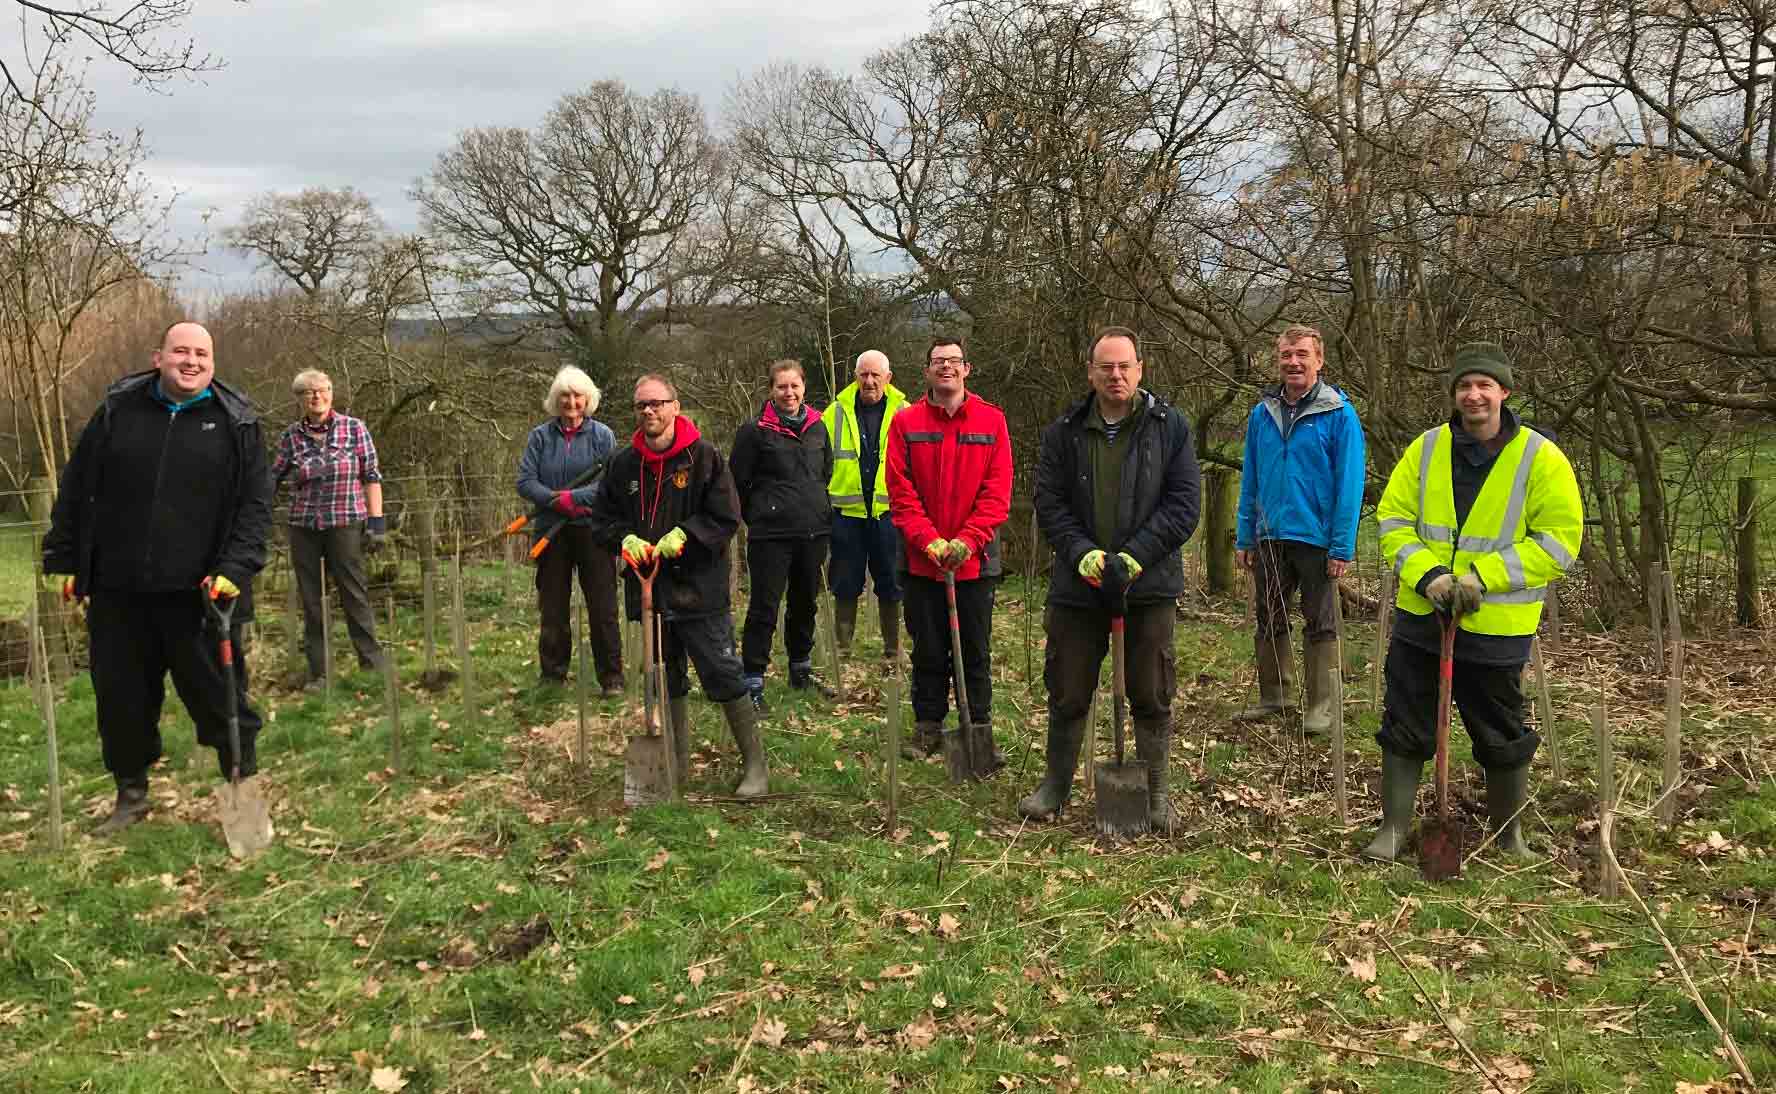 Tim Jackson (second from right) with Open Country’s Conservation Group rewilding the landscape at the Almscliffe Tennis & Bowling Club